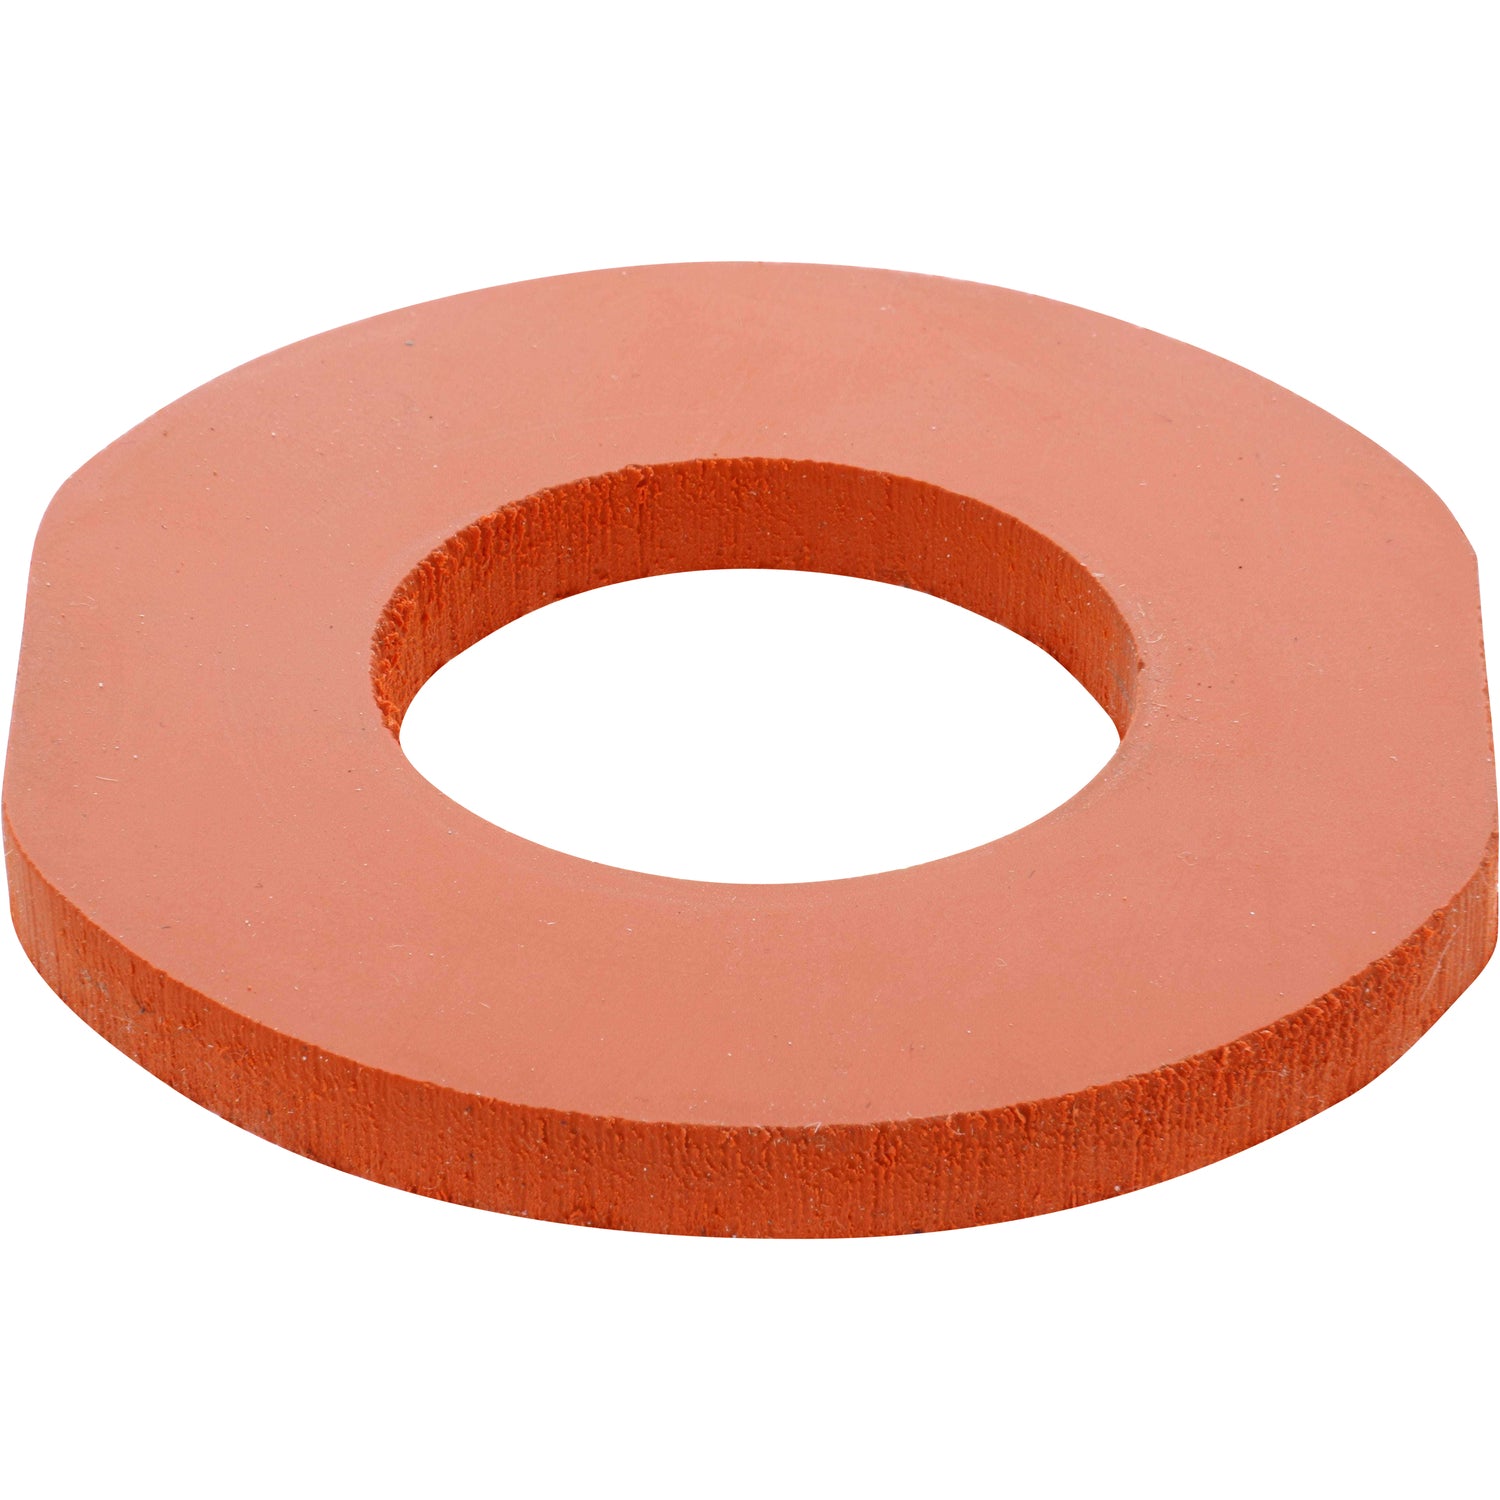 Orange rubber, disk-shaped seal with flats on both outer edges. P0-02198